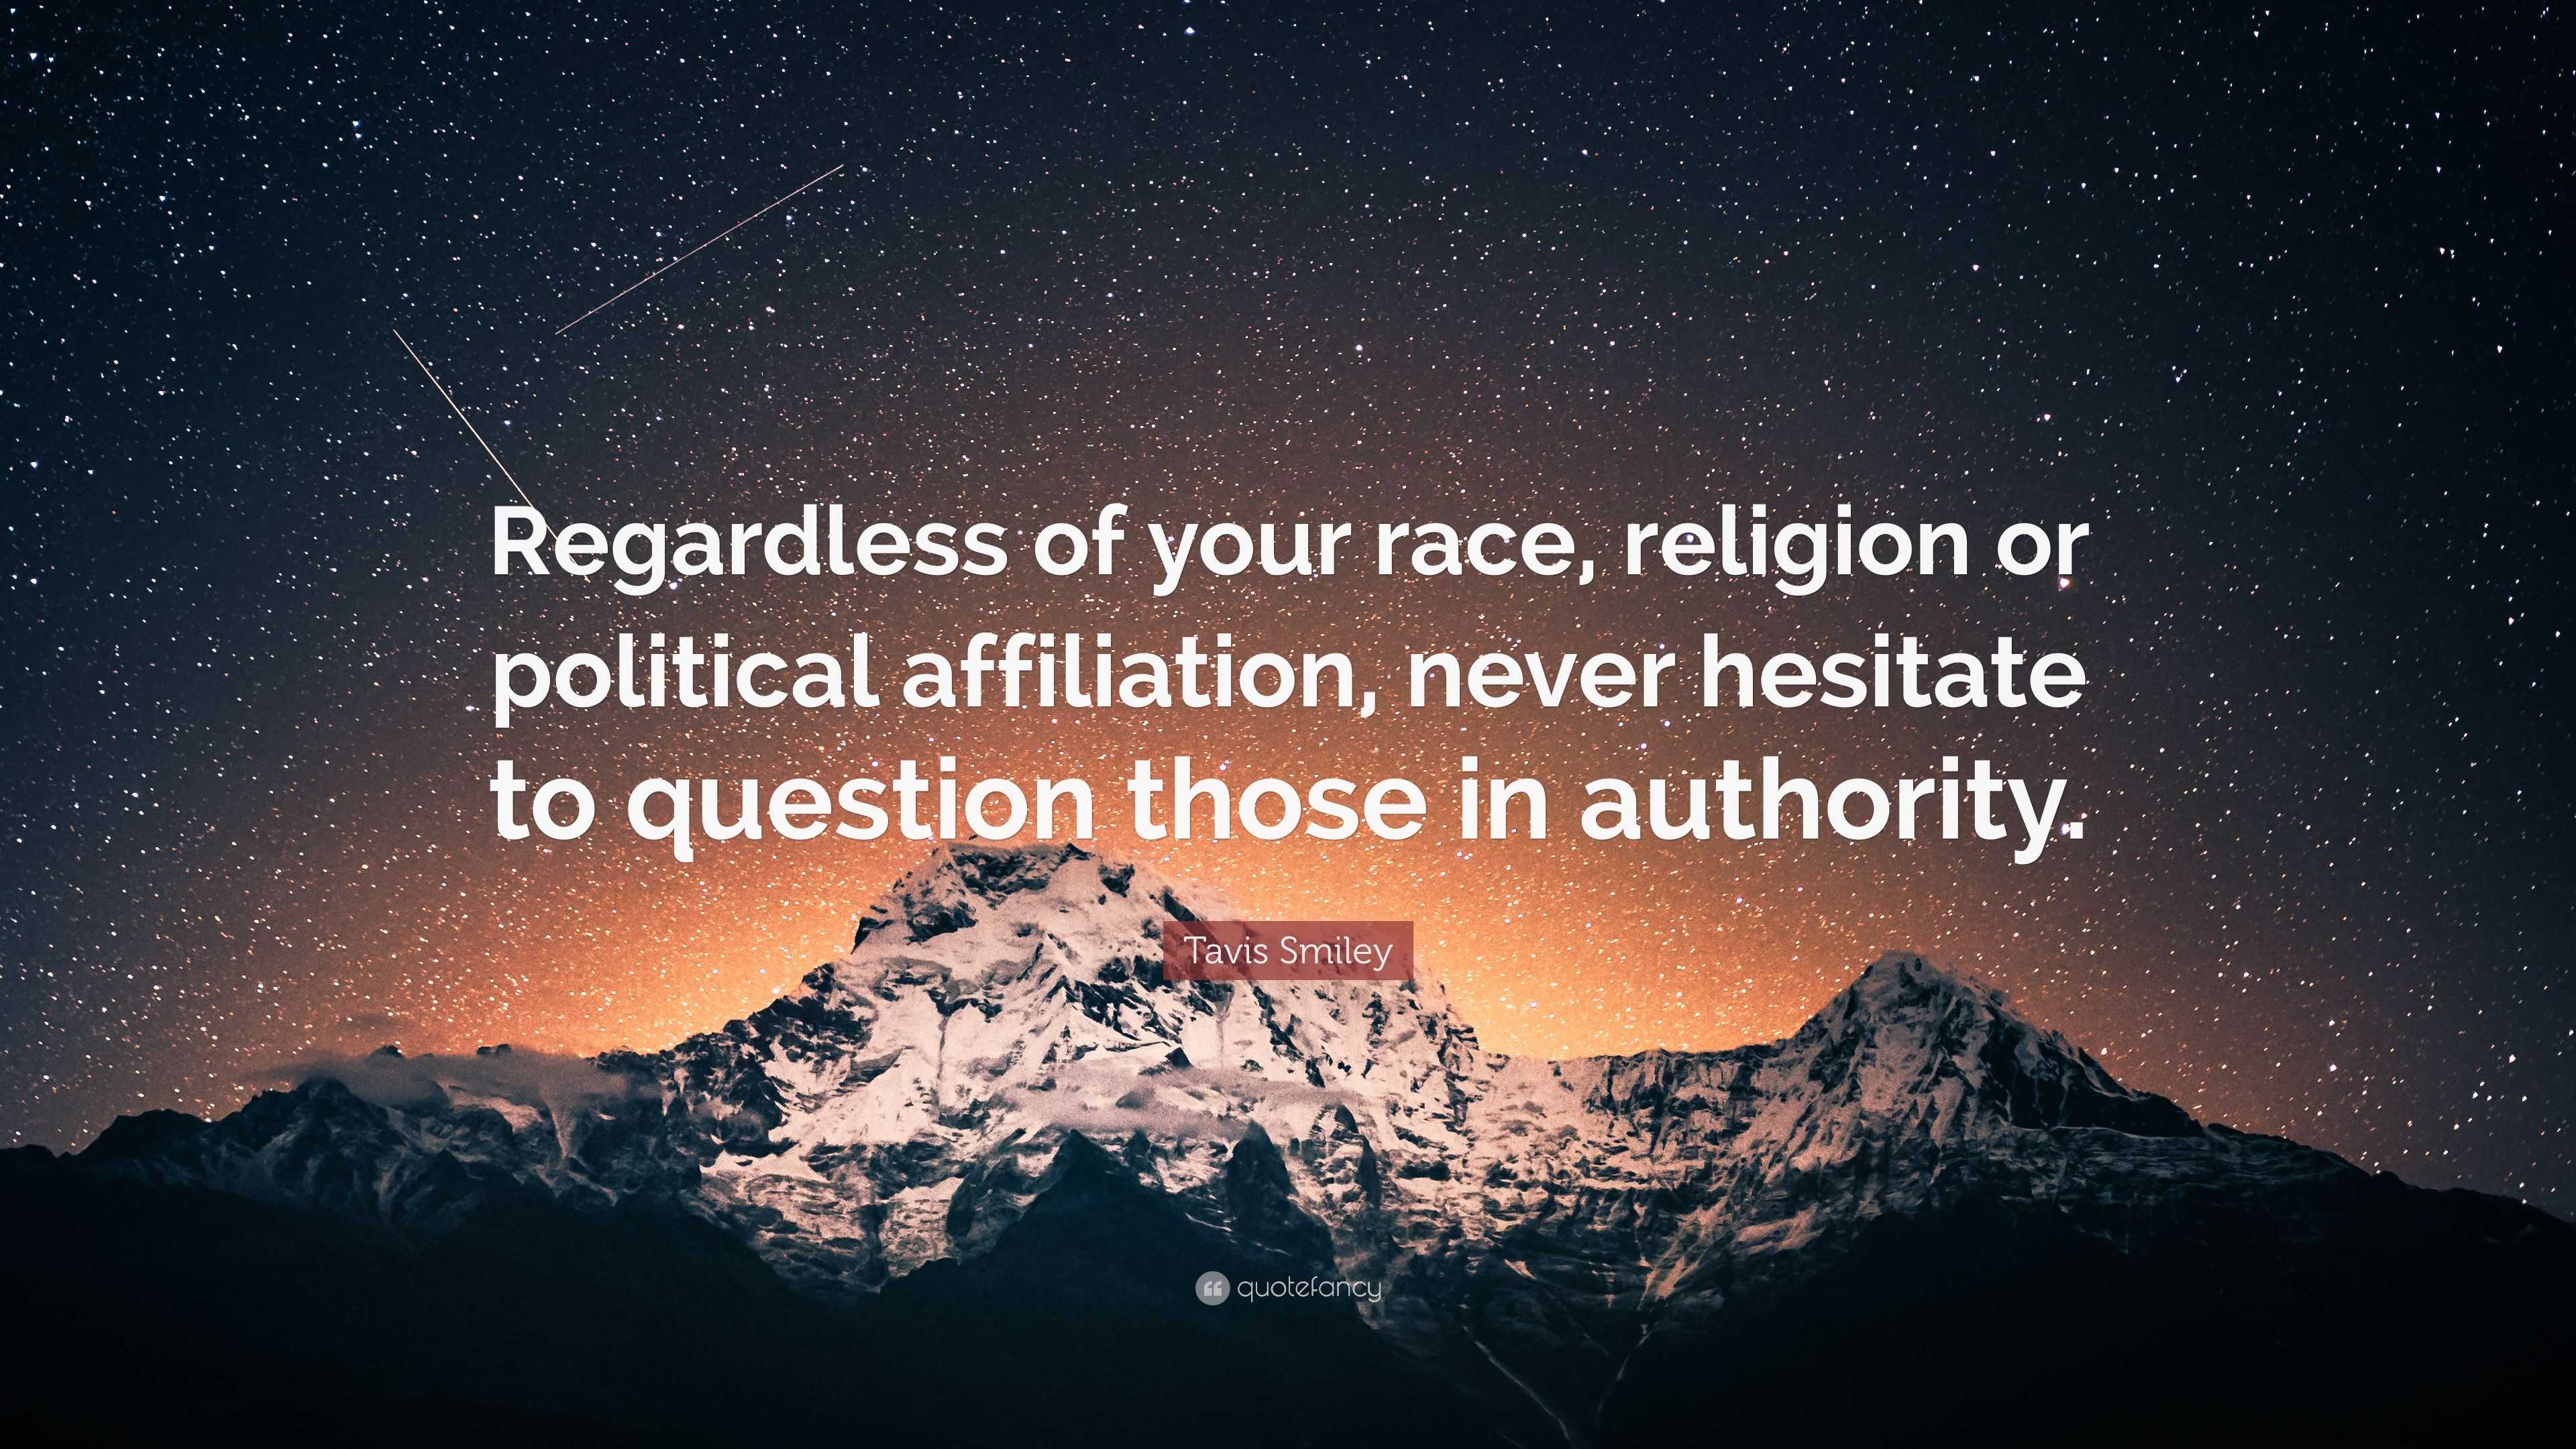 Tavis Smiley Quote: "Regardless of your race, religion or ...